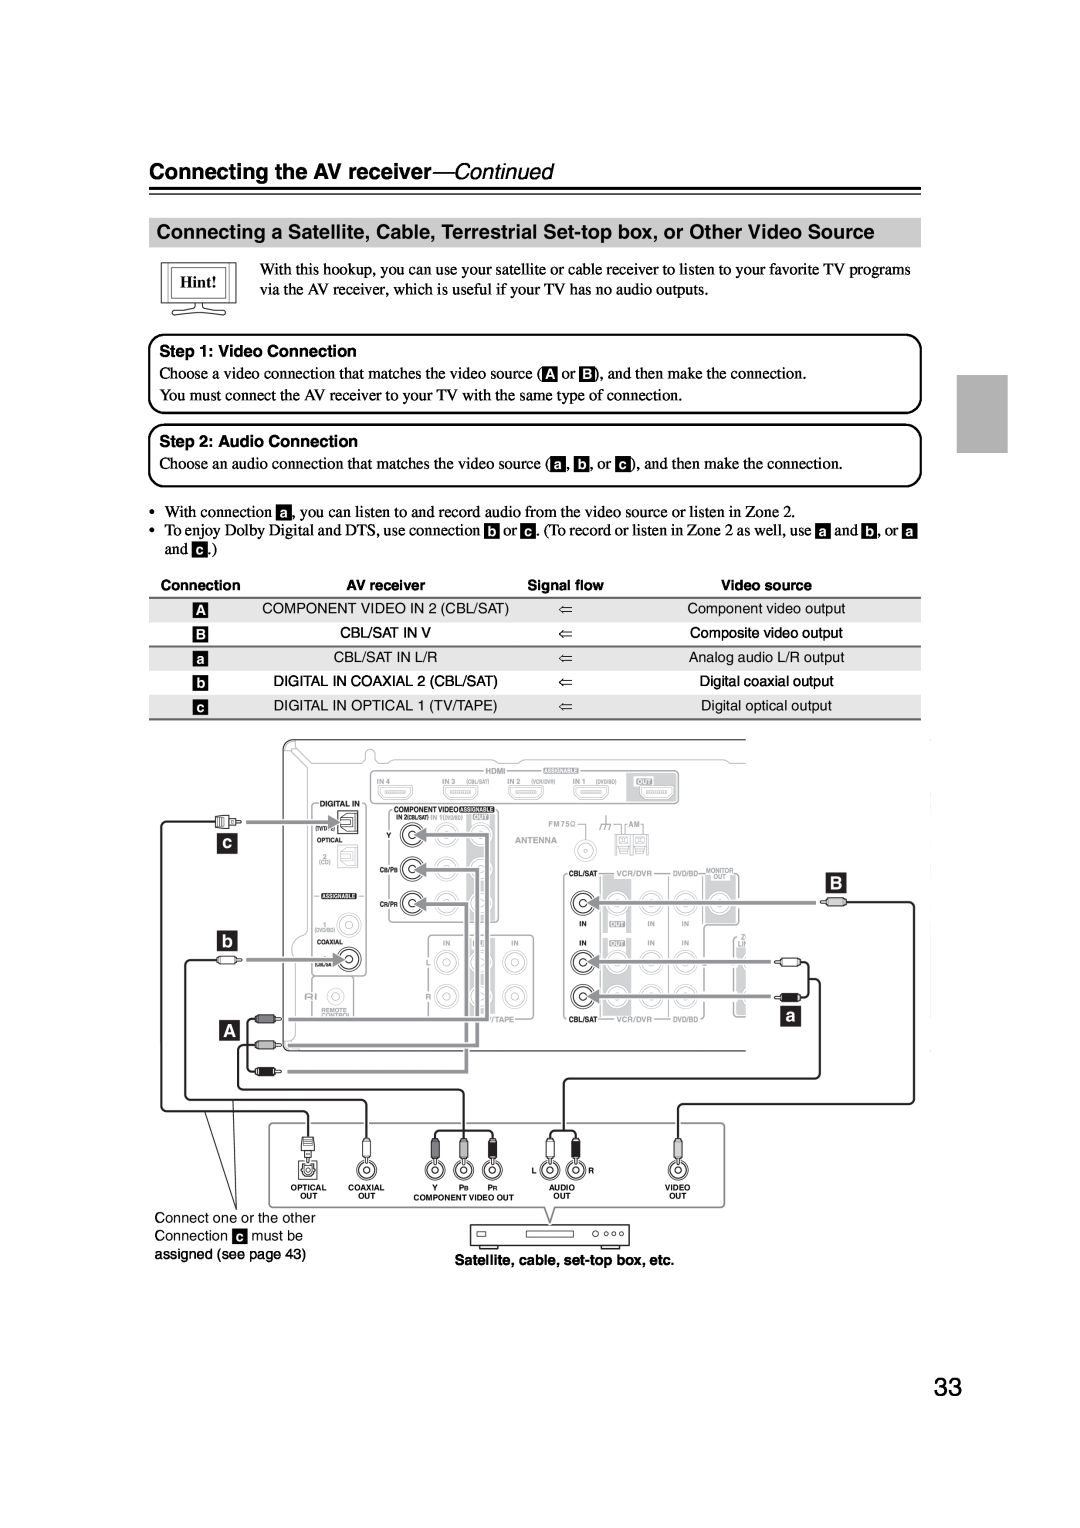 Onkyo HT-S6200, 29344937 instruction manual Connecting the AV receiver—Continued, Hint, COMPONENT VIDEO IN 2 CBL/SAT 